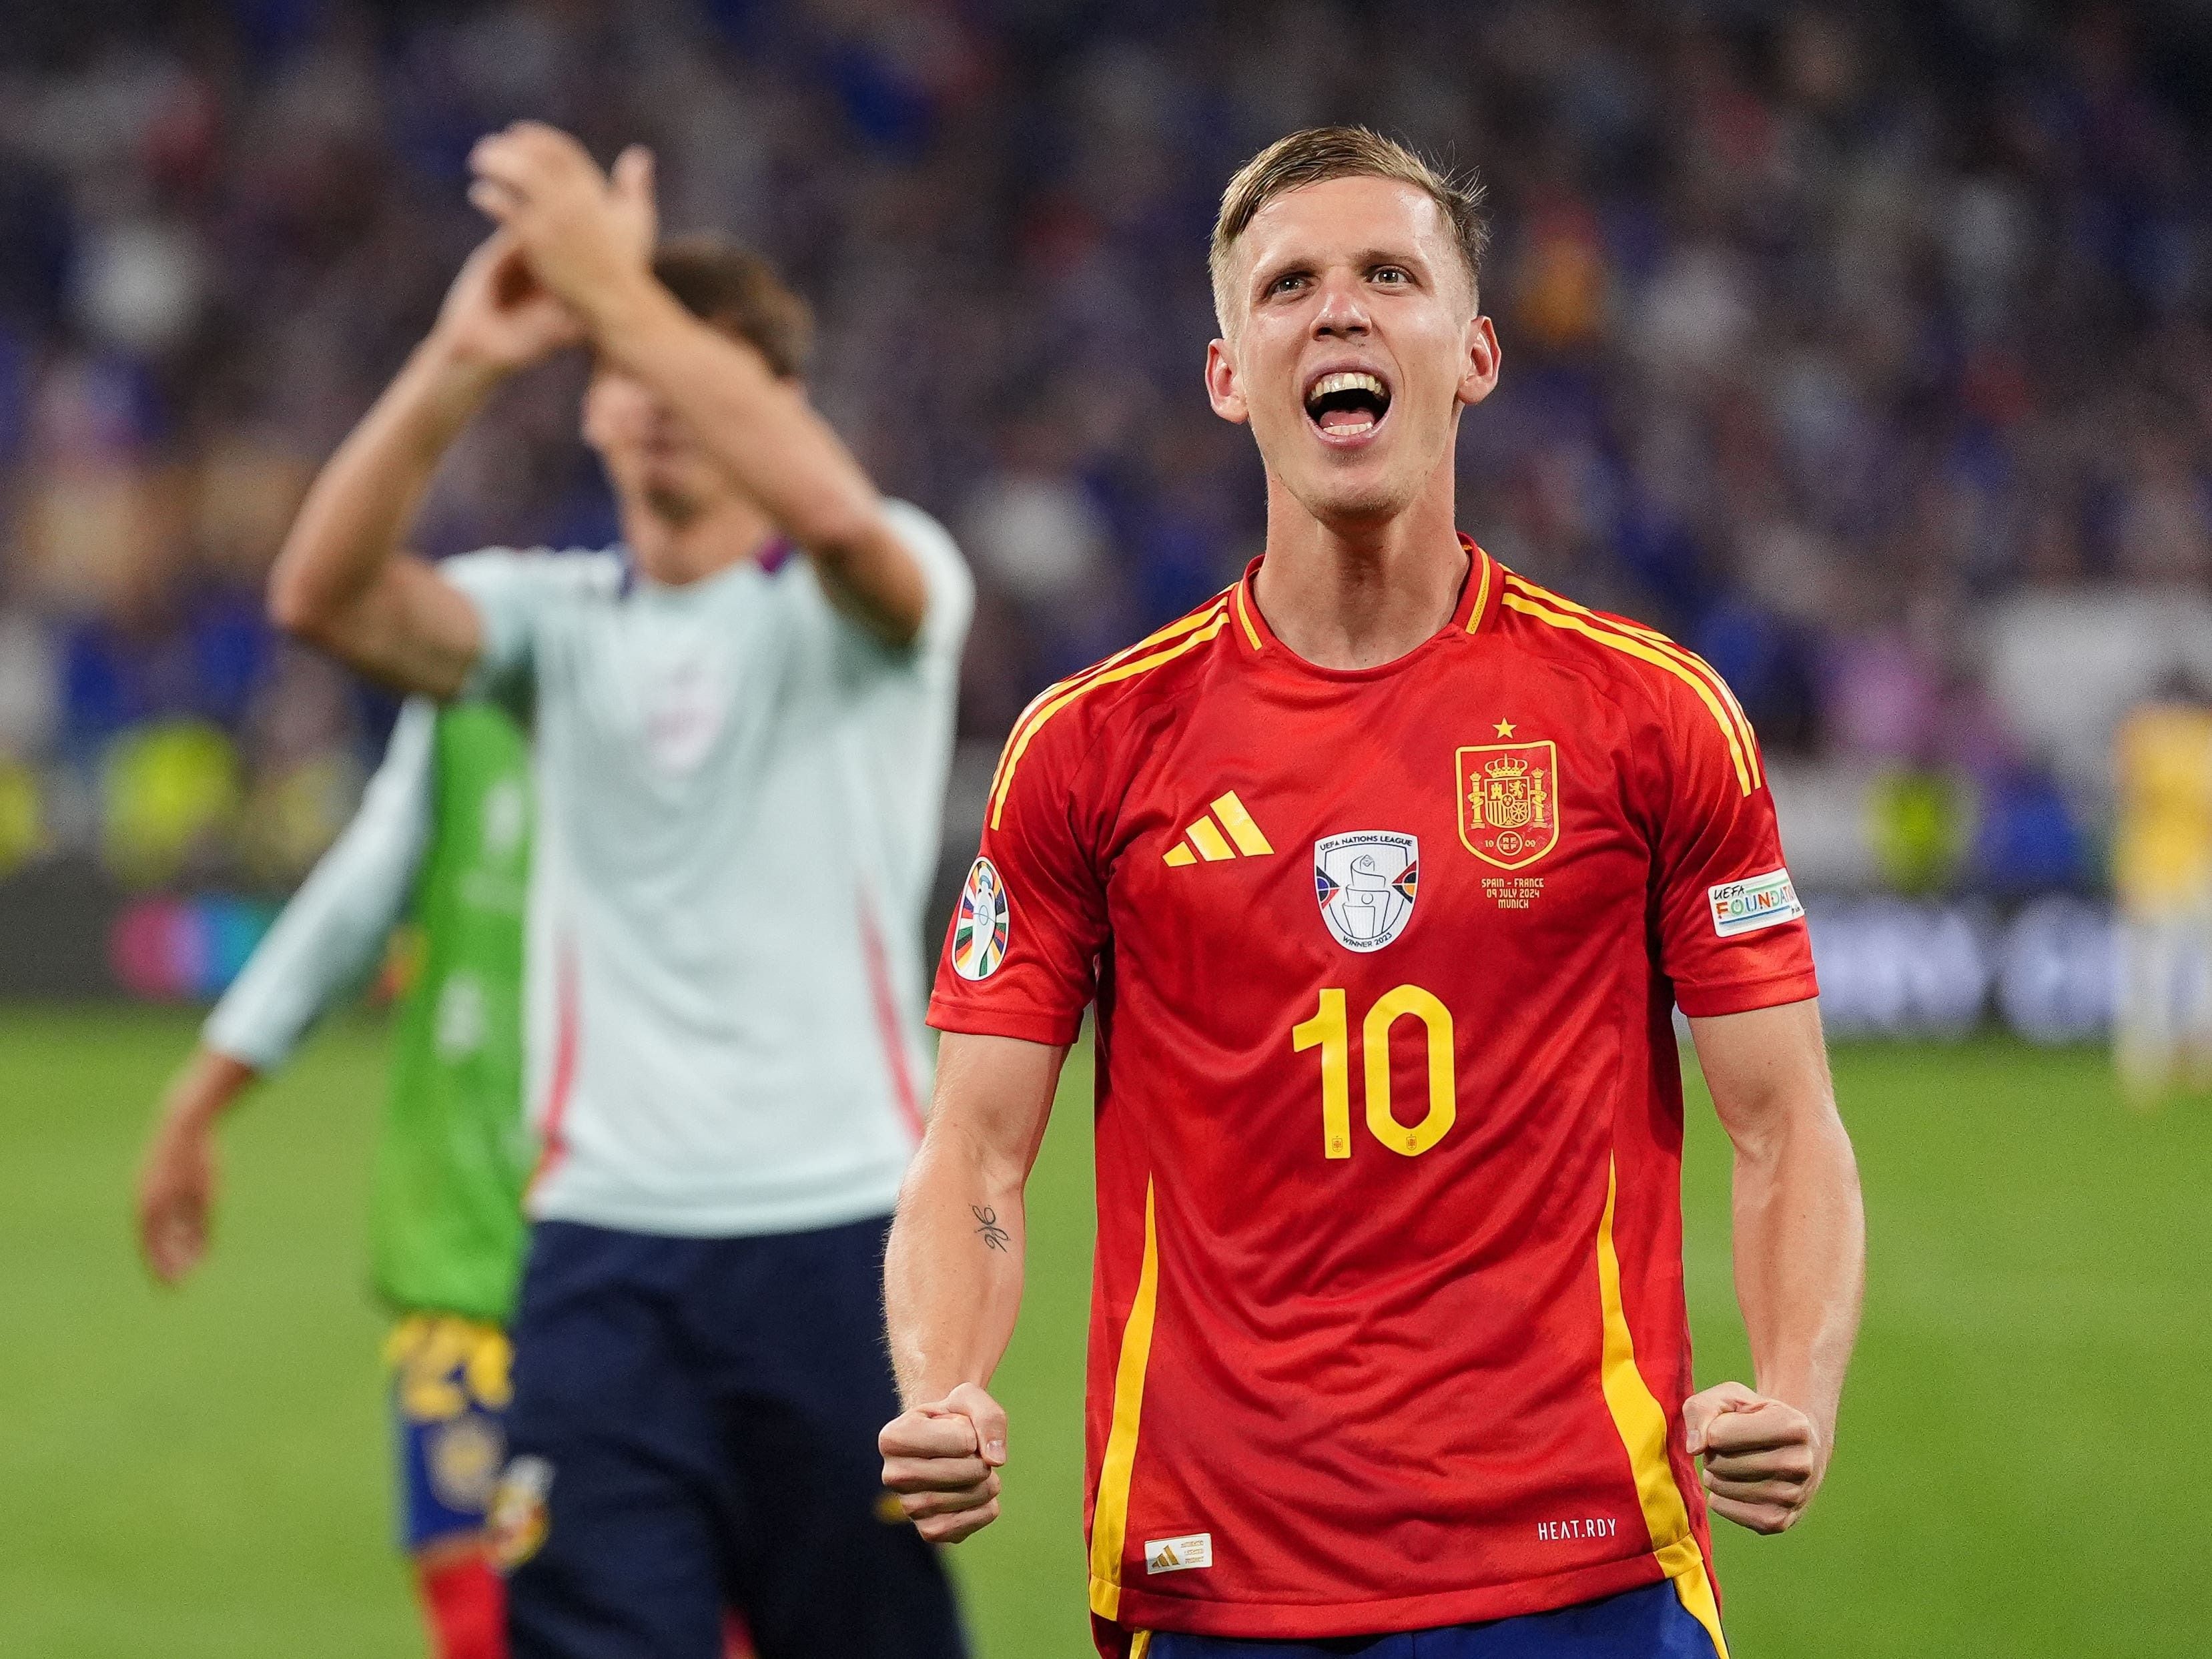 Dani Olmo: Spain are only thinking about the final, not breaking records